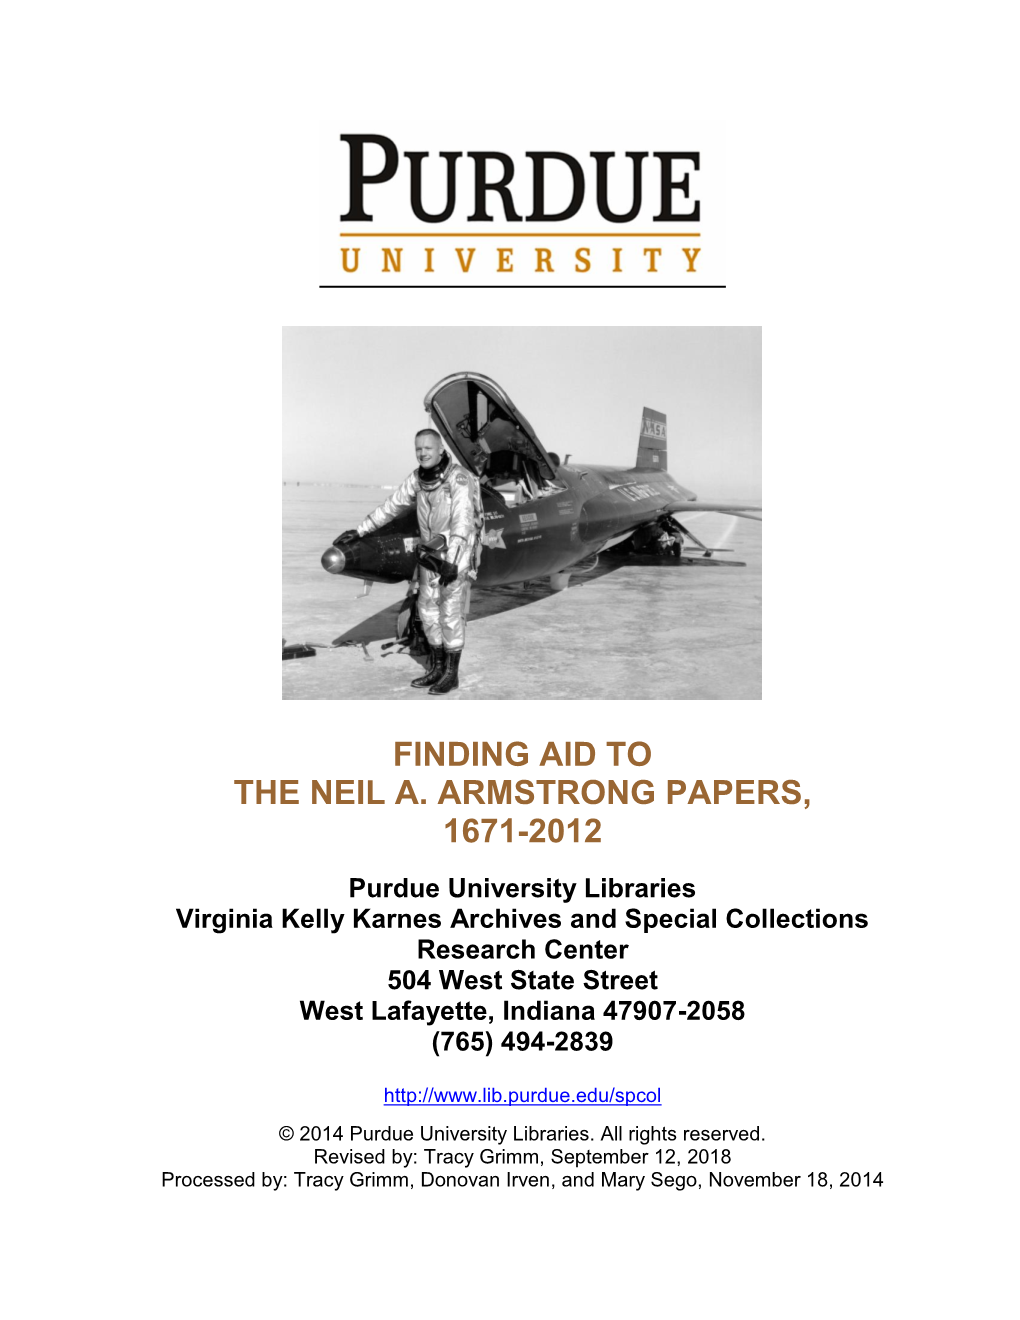 Finding Aid to the Neil A. Armstrong Papers, 1671-2012